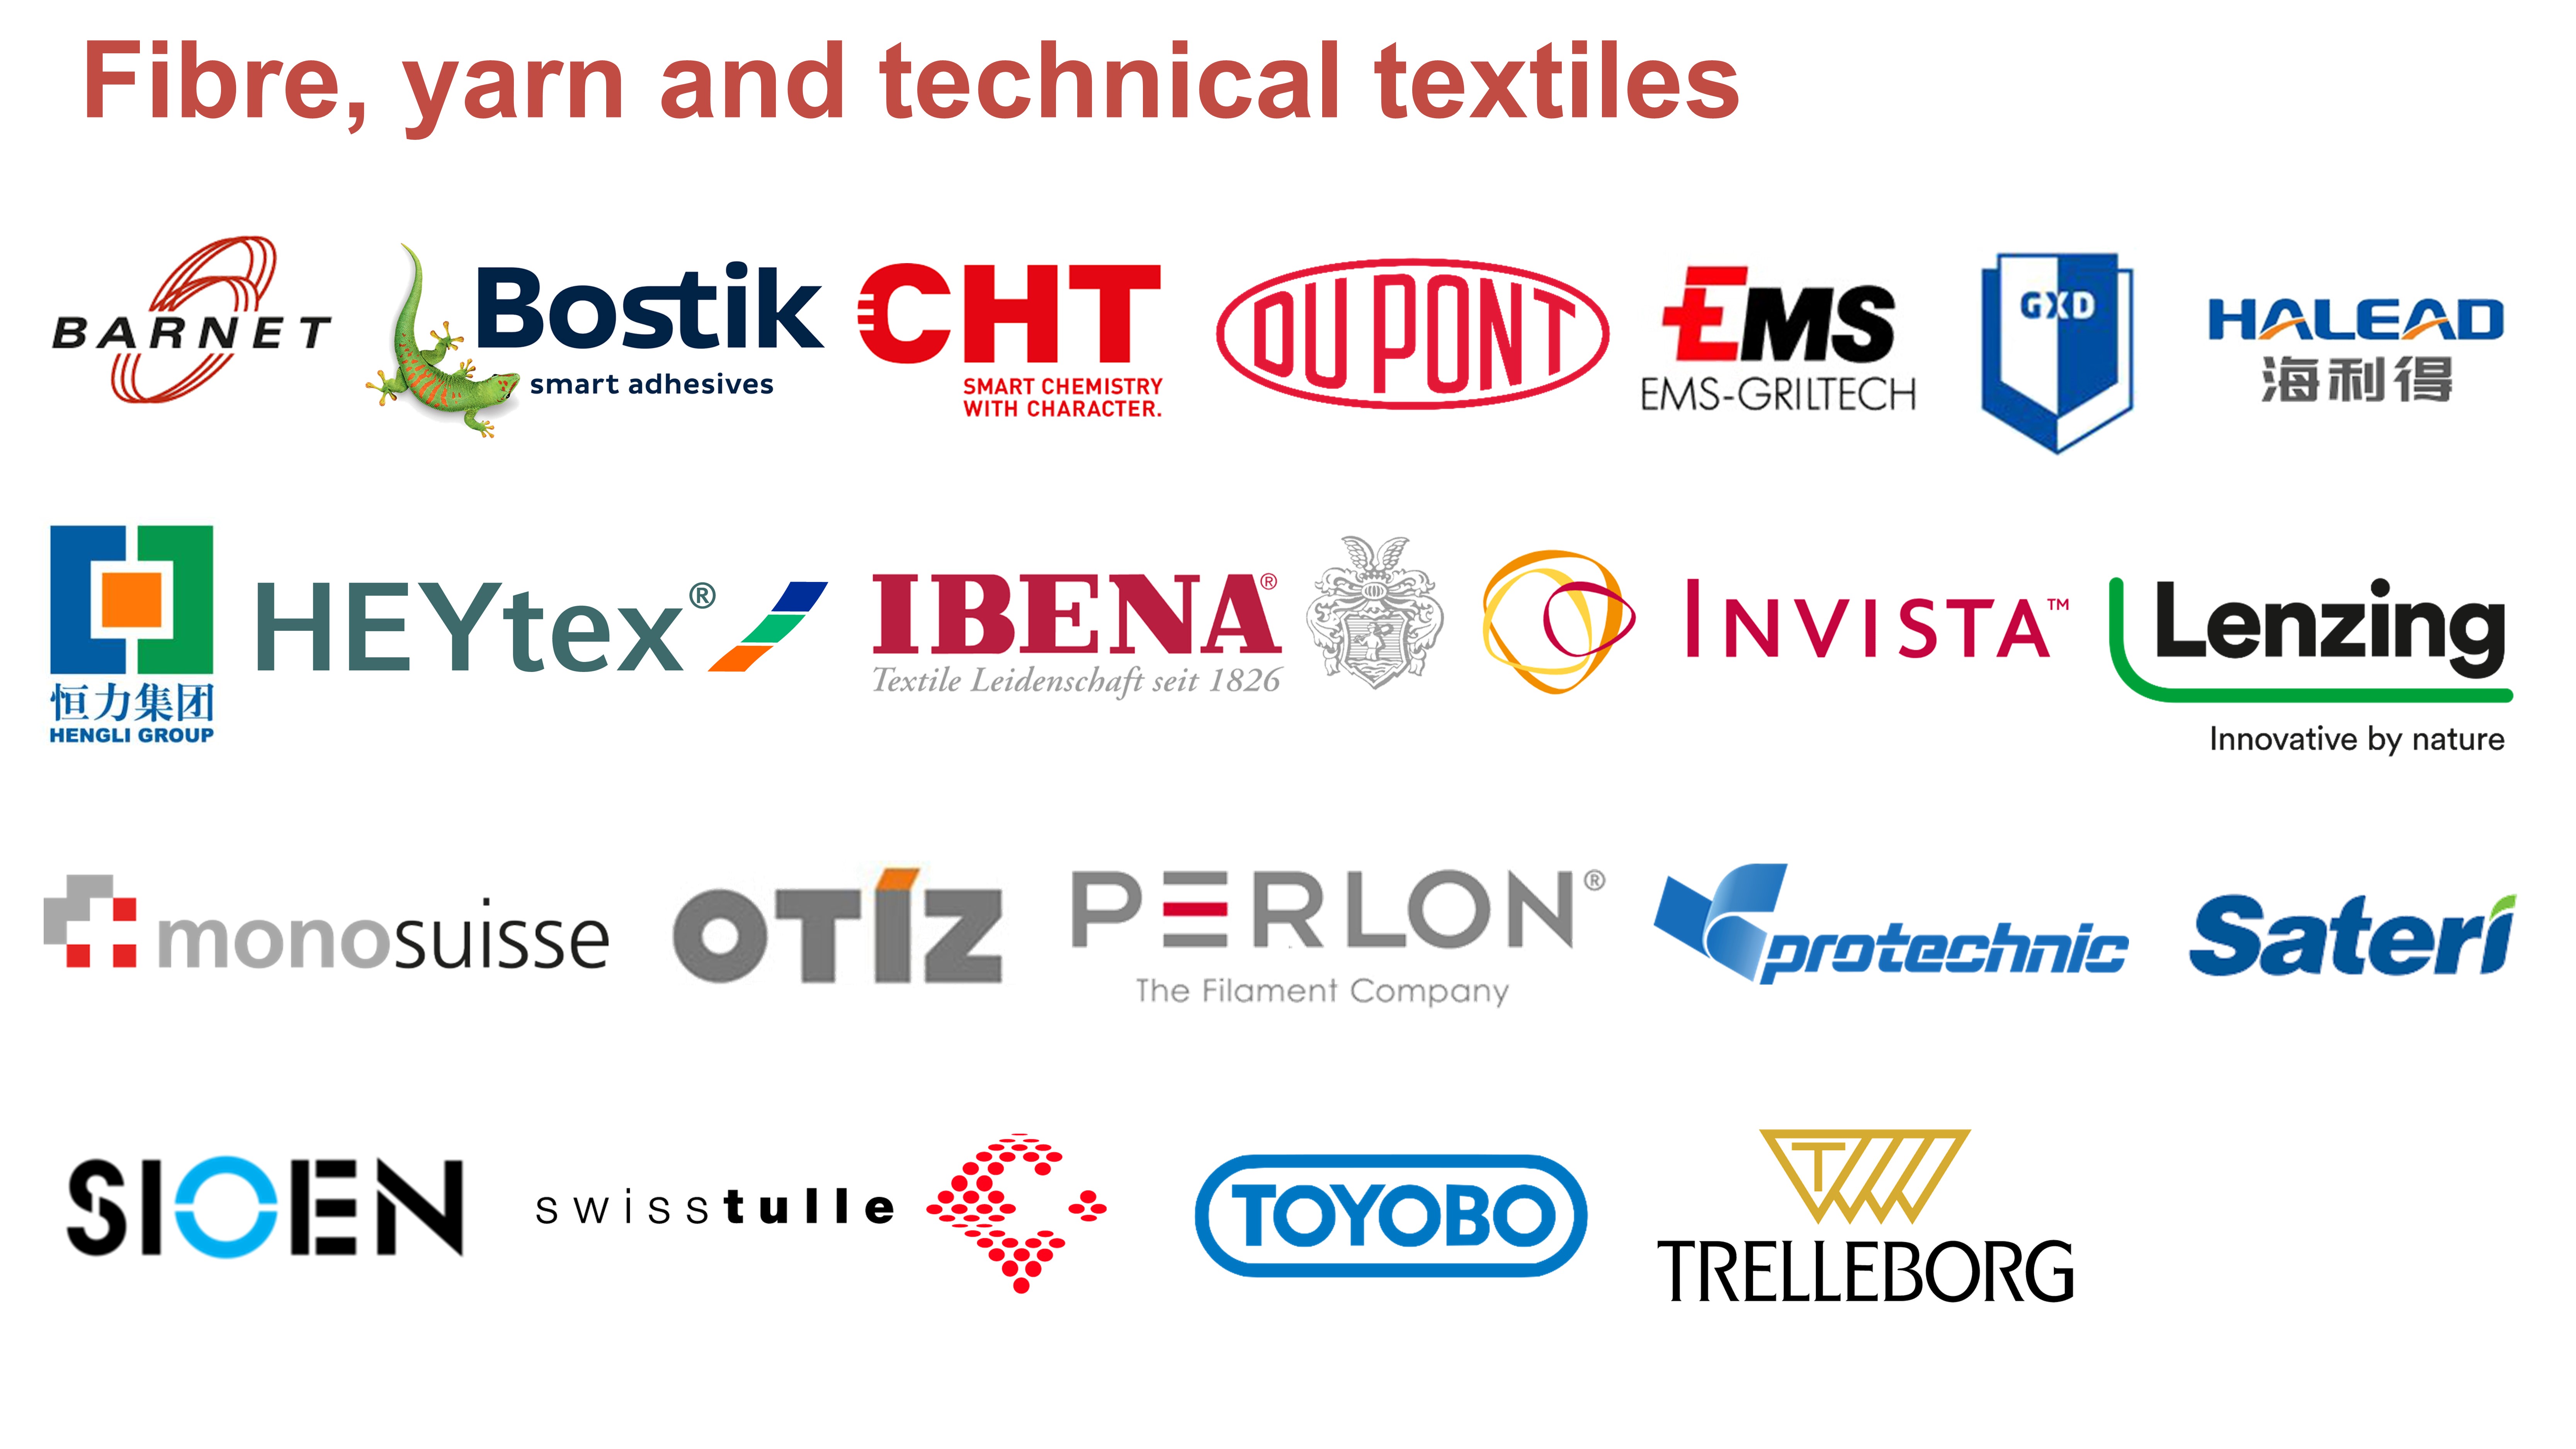 CTC past exh-firbre_yarn_technical textiles